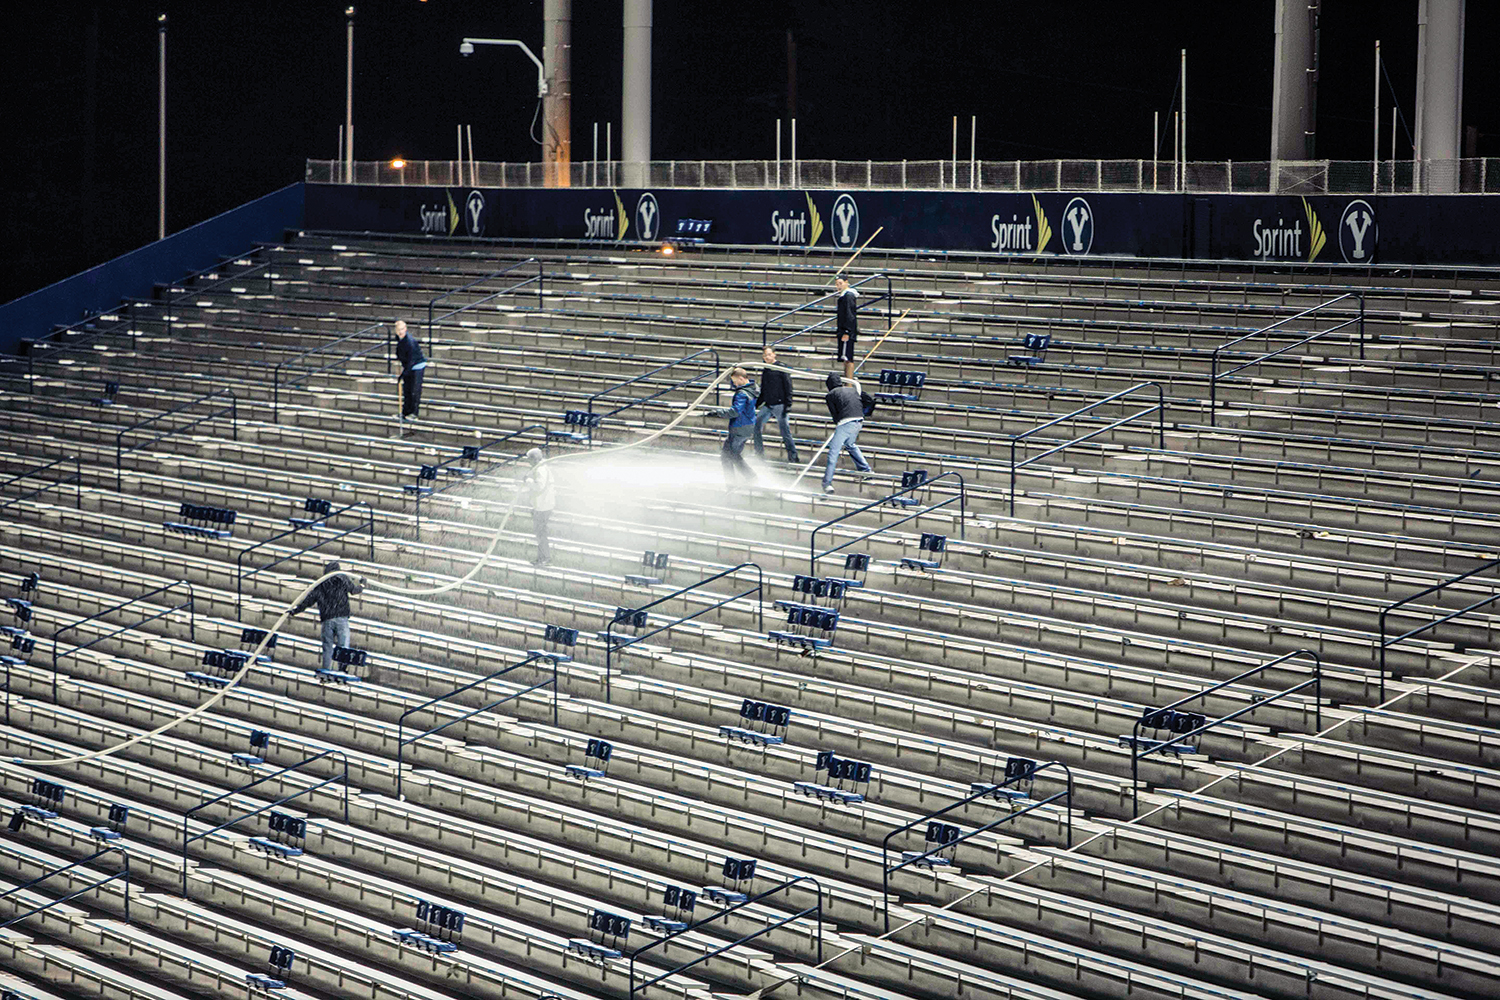 Teams of volunteers hose down the bleachers after a game.